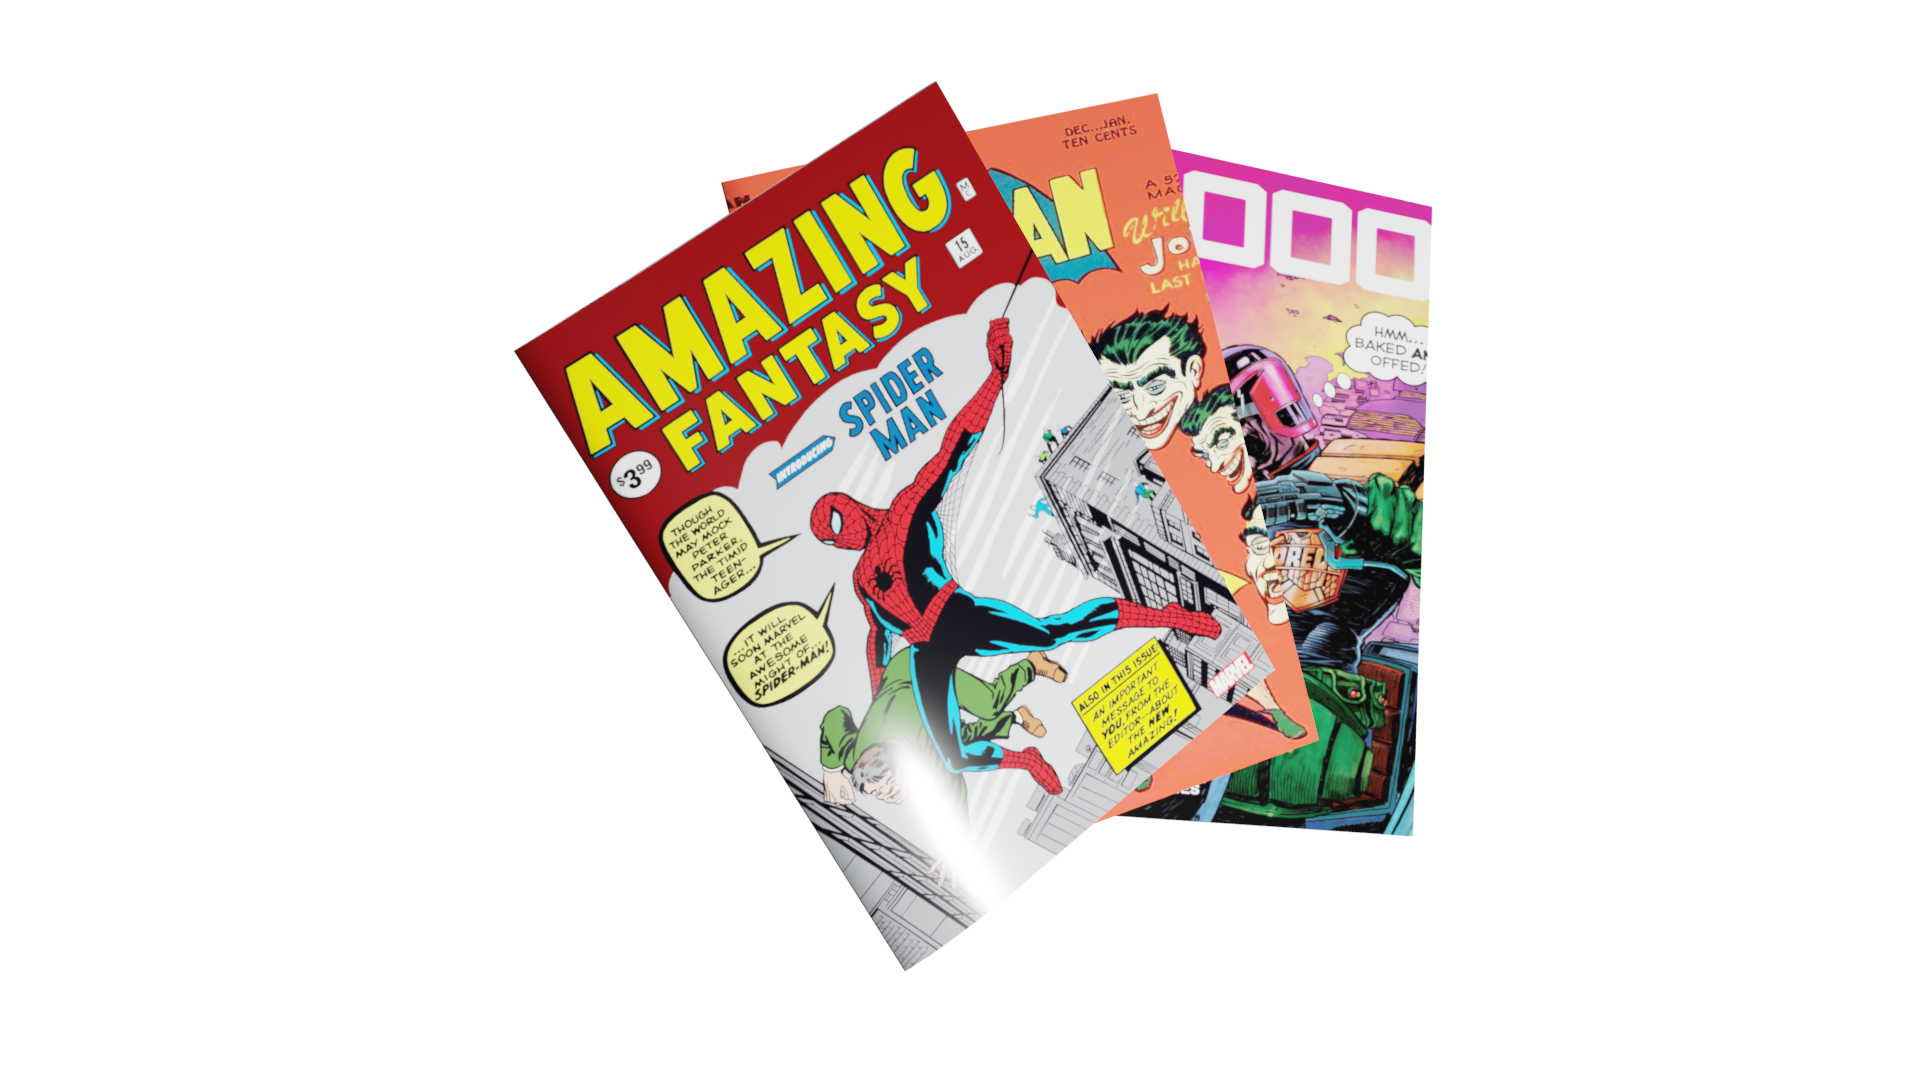 Colorful comics - Discover the fascinating world of comics through Voodoo Radio Online's engaging reviews.